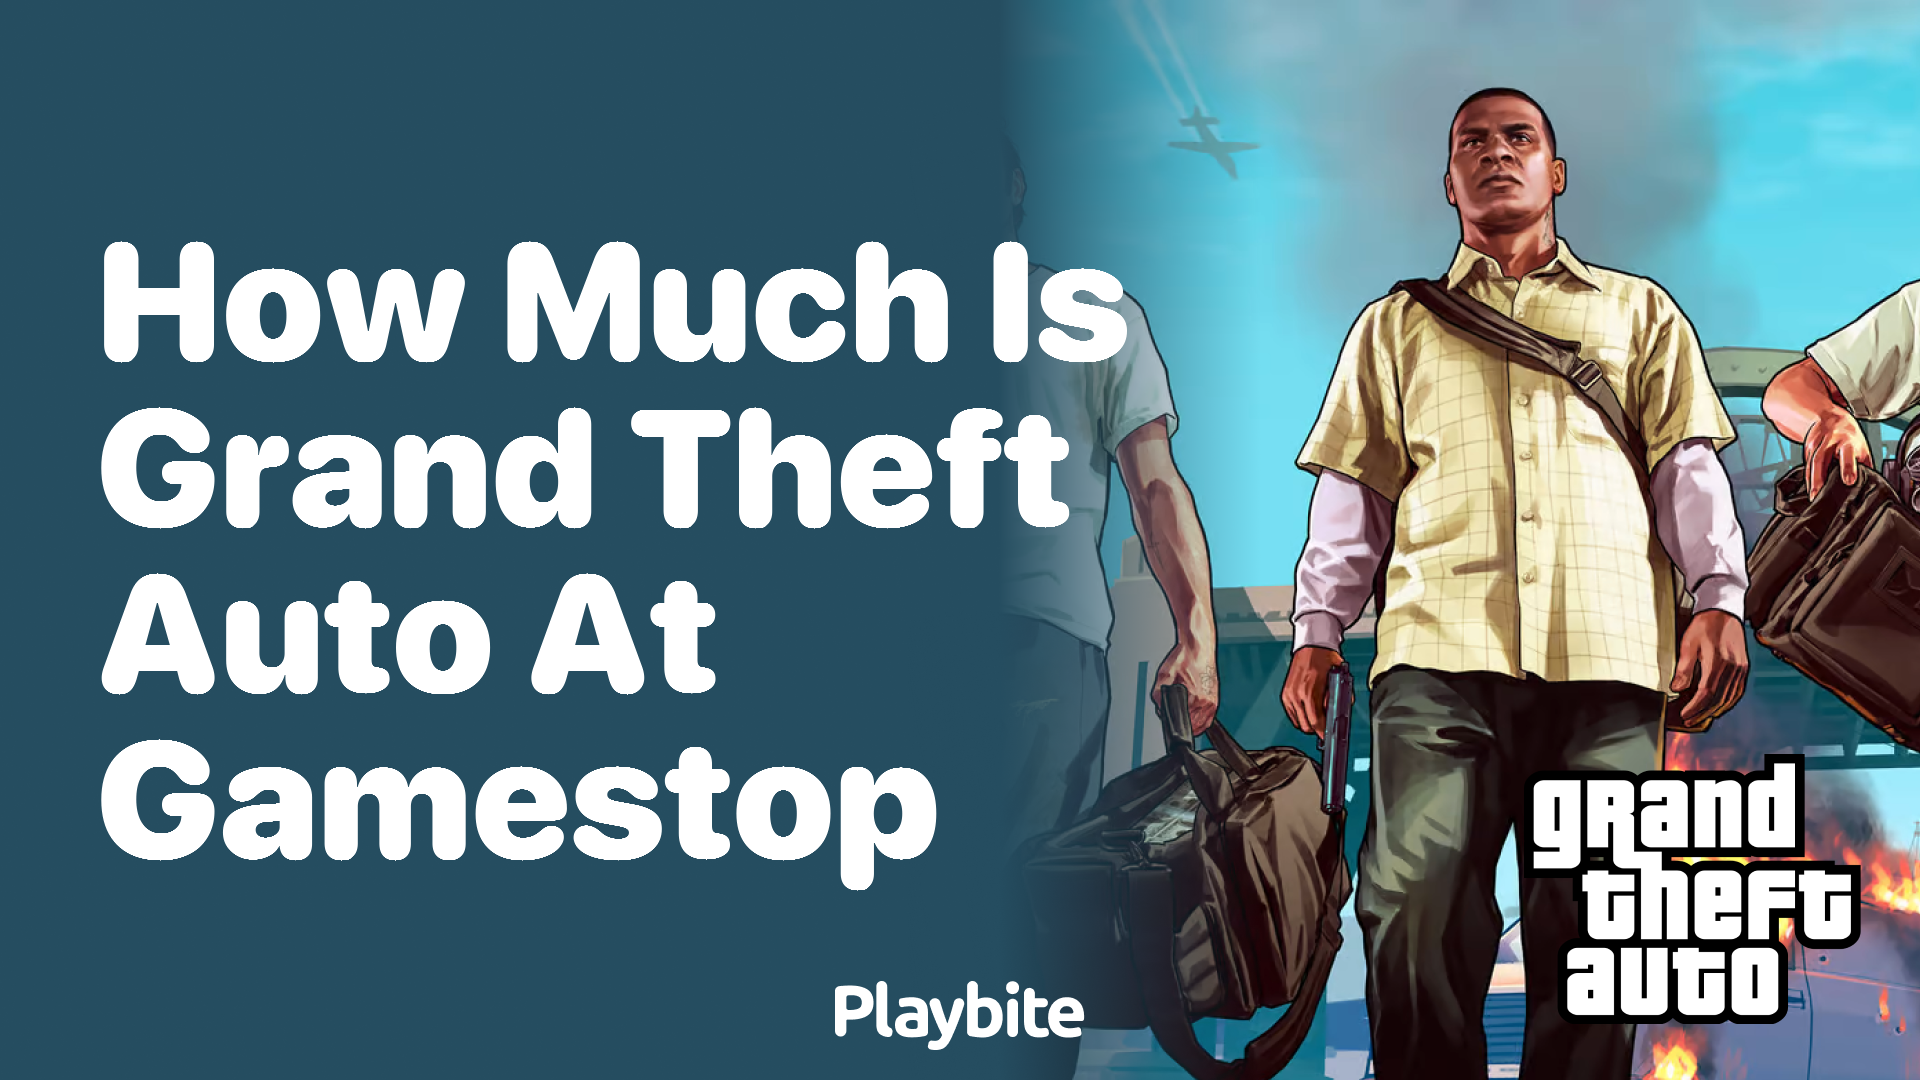 How much does Grand Theft Auto cost at GameStop?